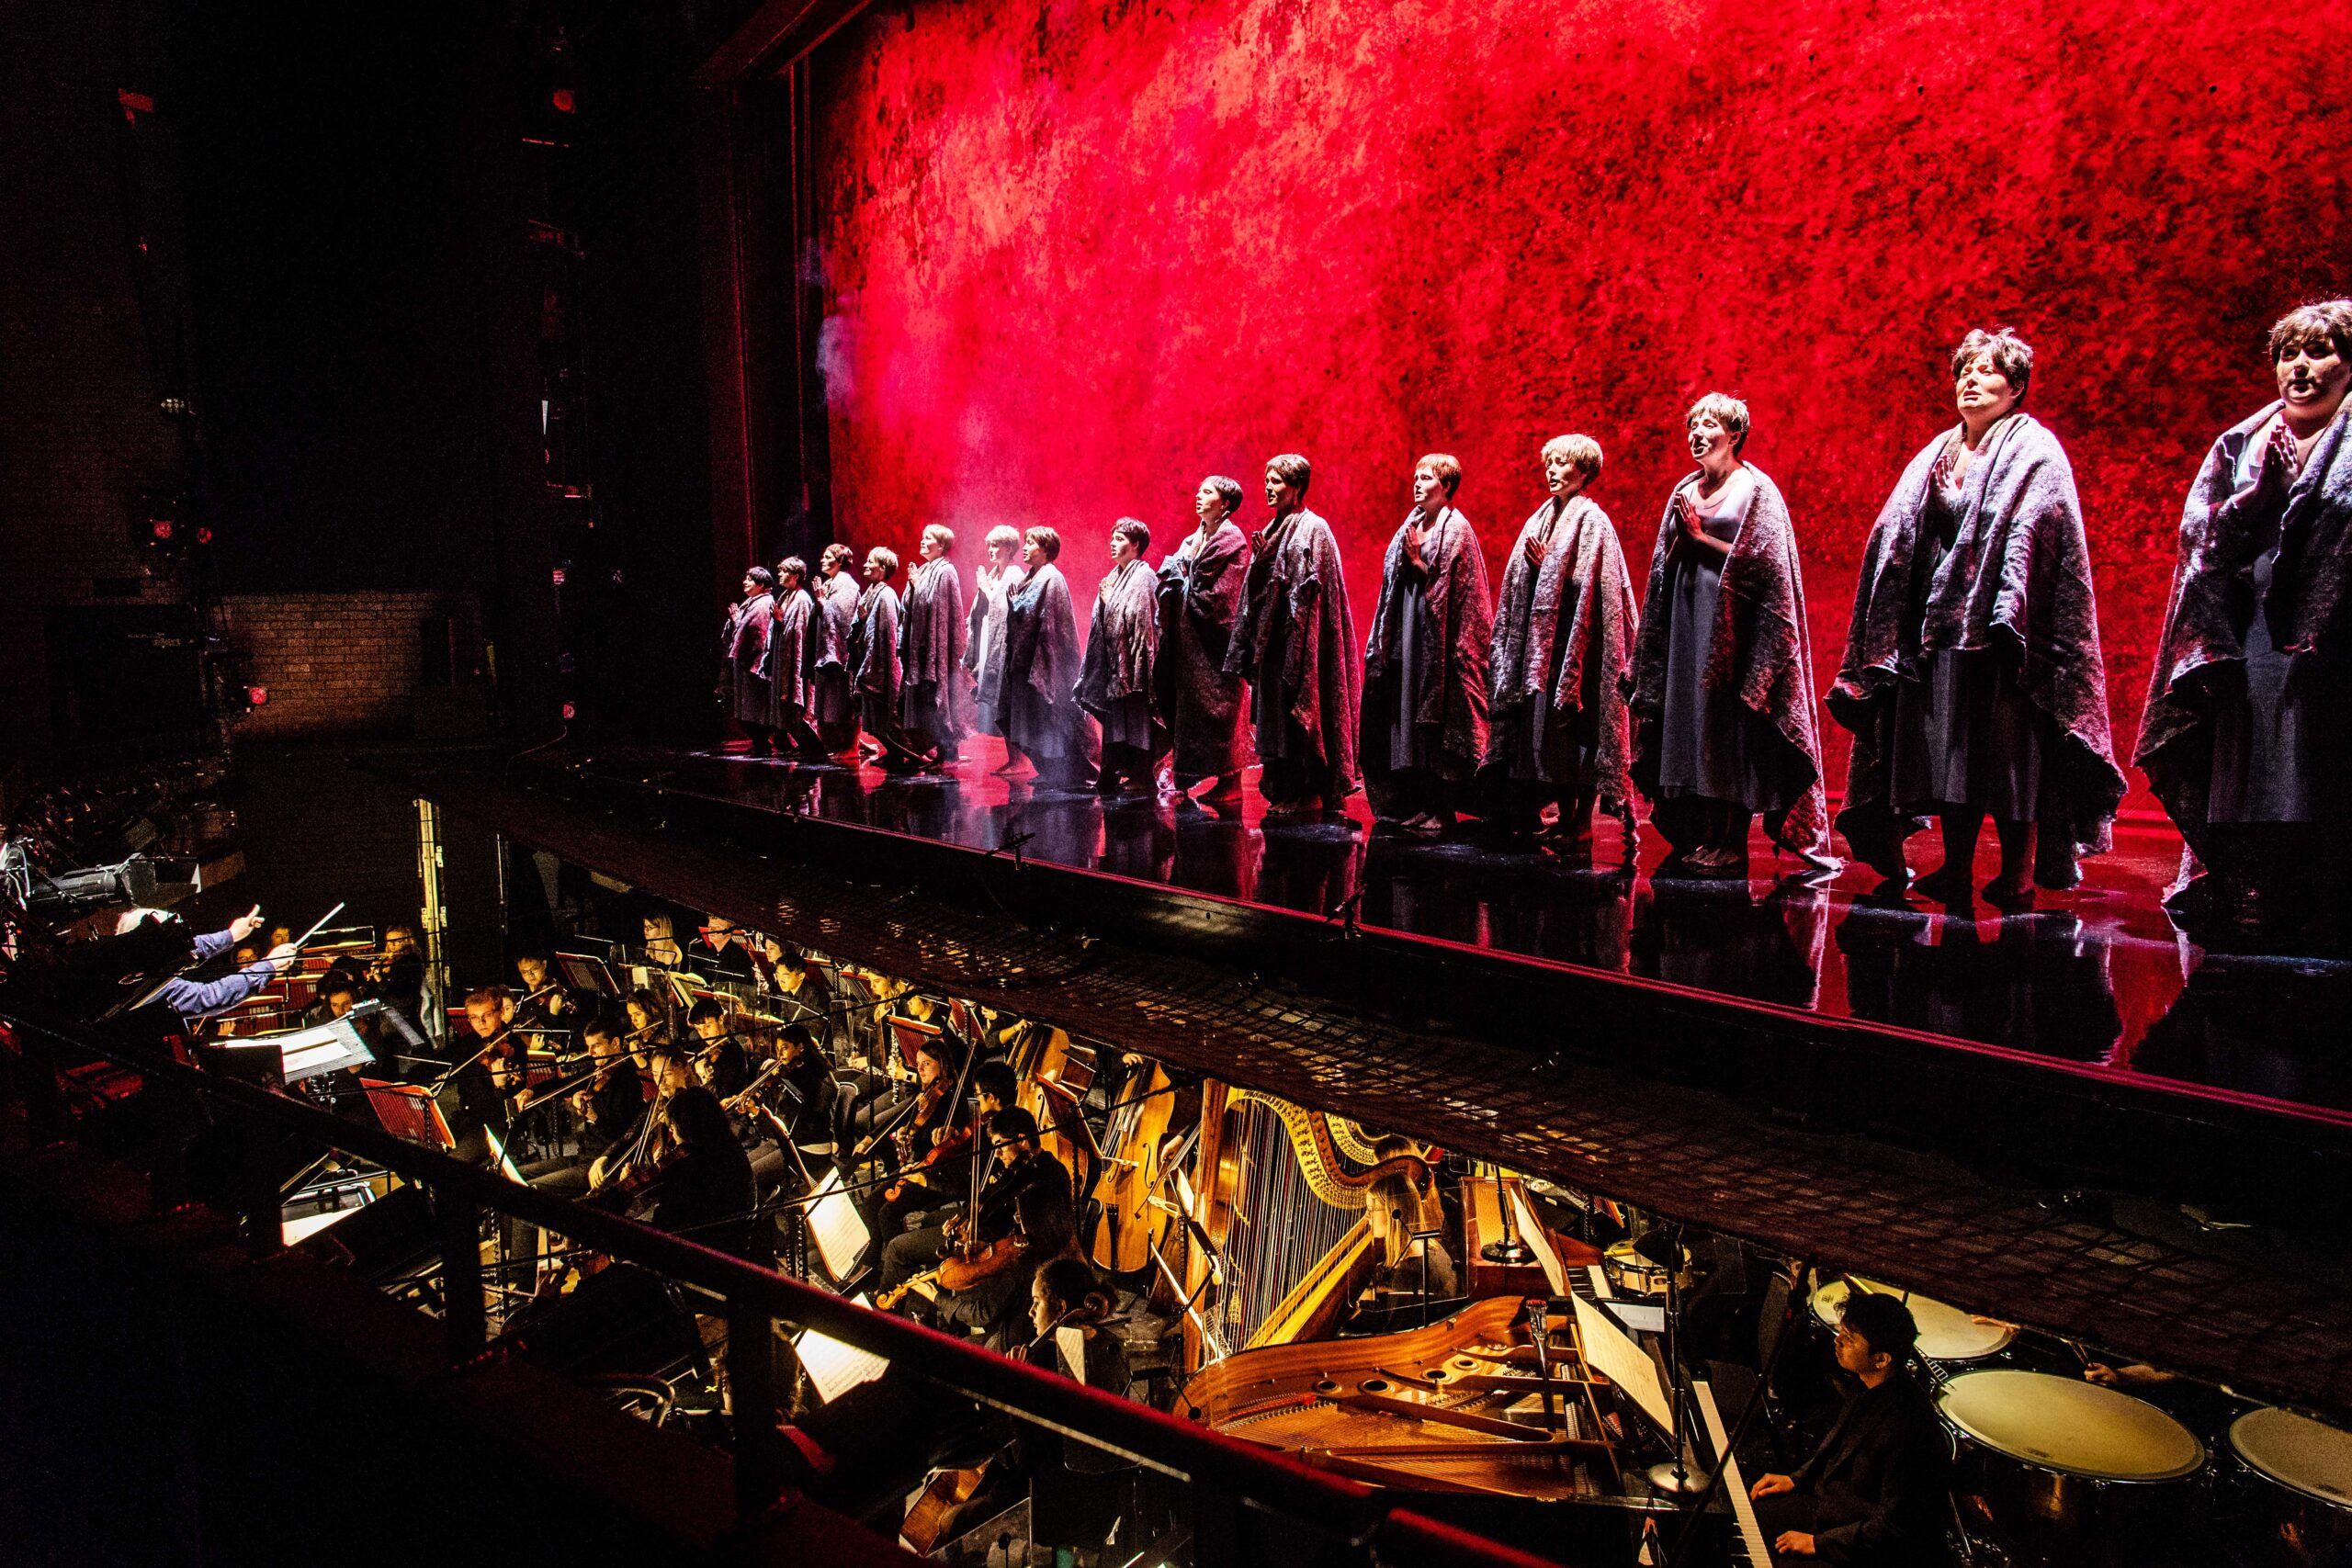 Women in shawls stand in a line on stage during a performance of the opera Dialogues des Carmelites.